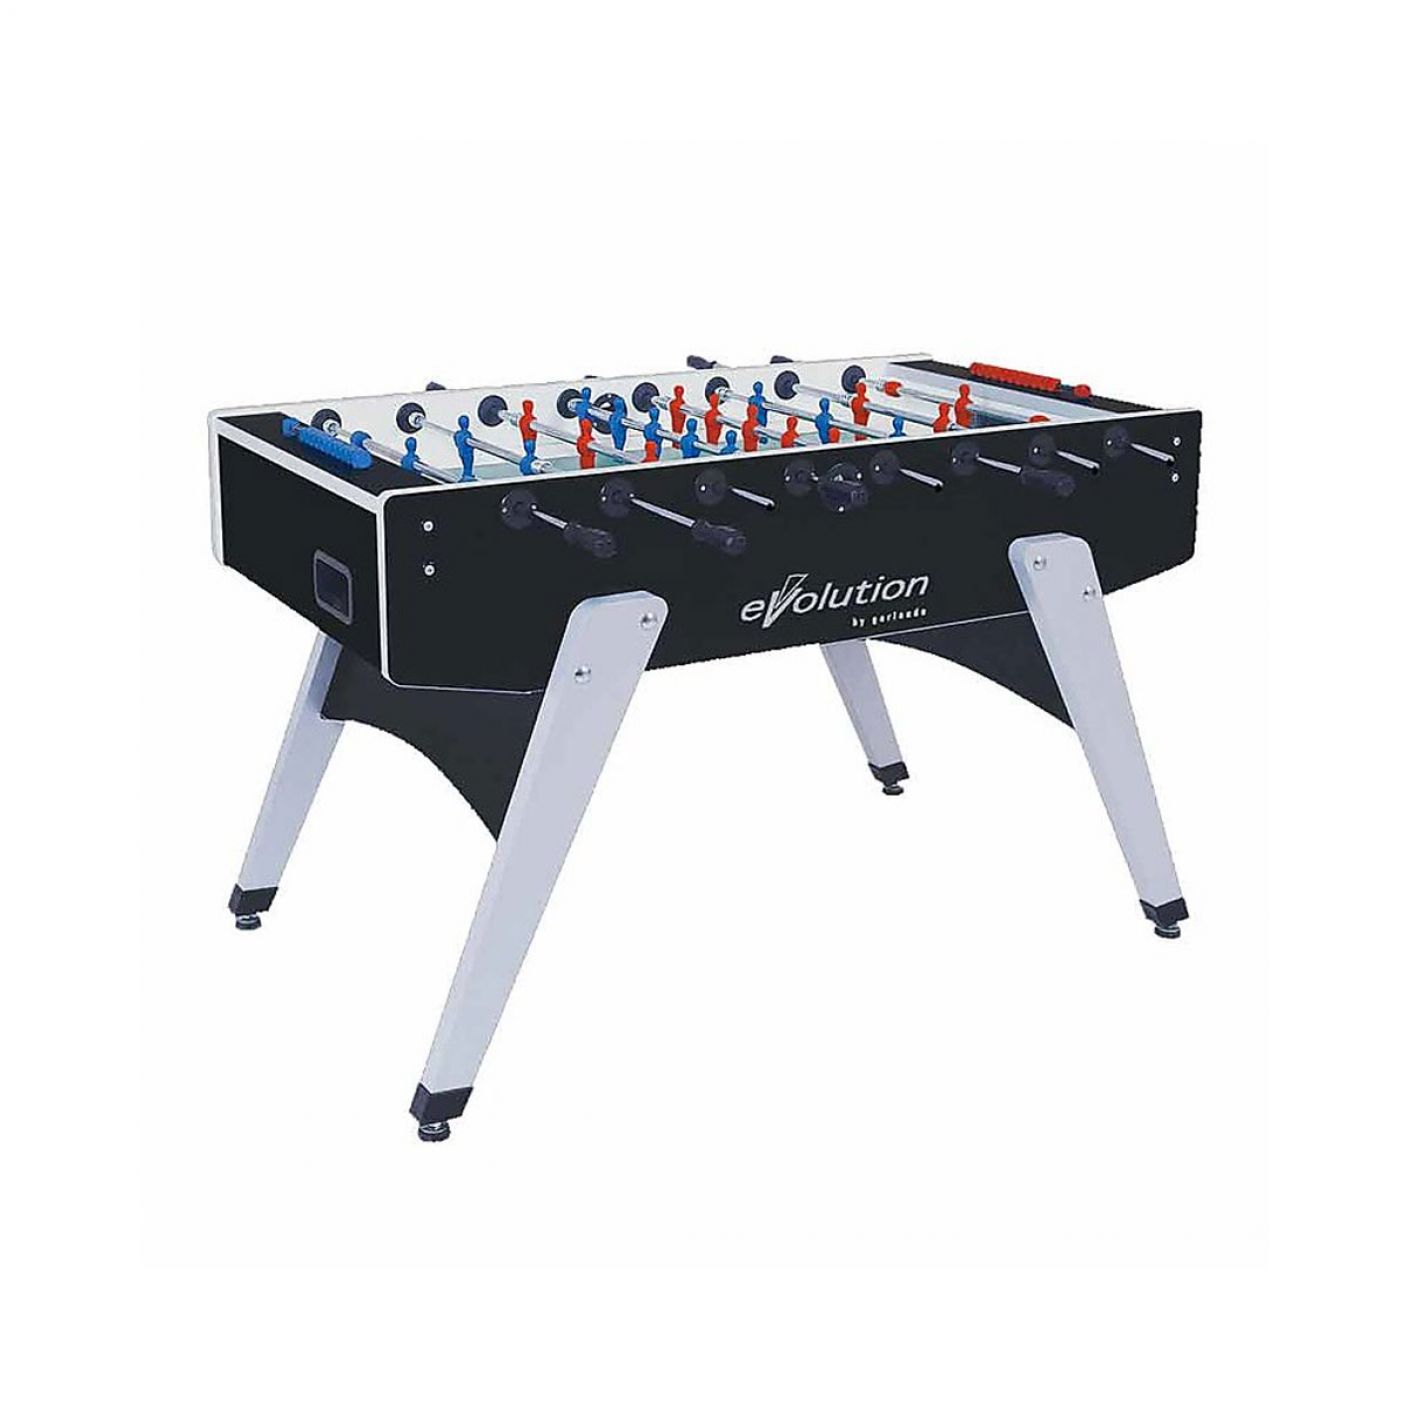 Garlando Soccer Table IMAGE with outgoing rods